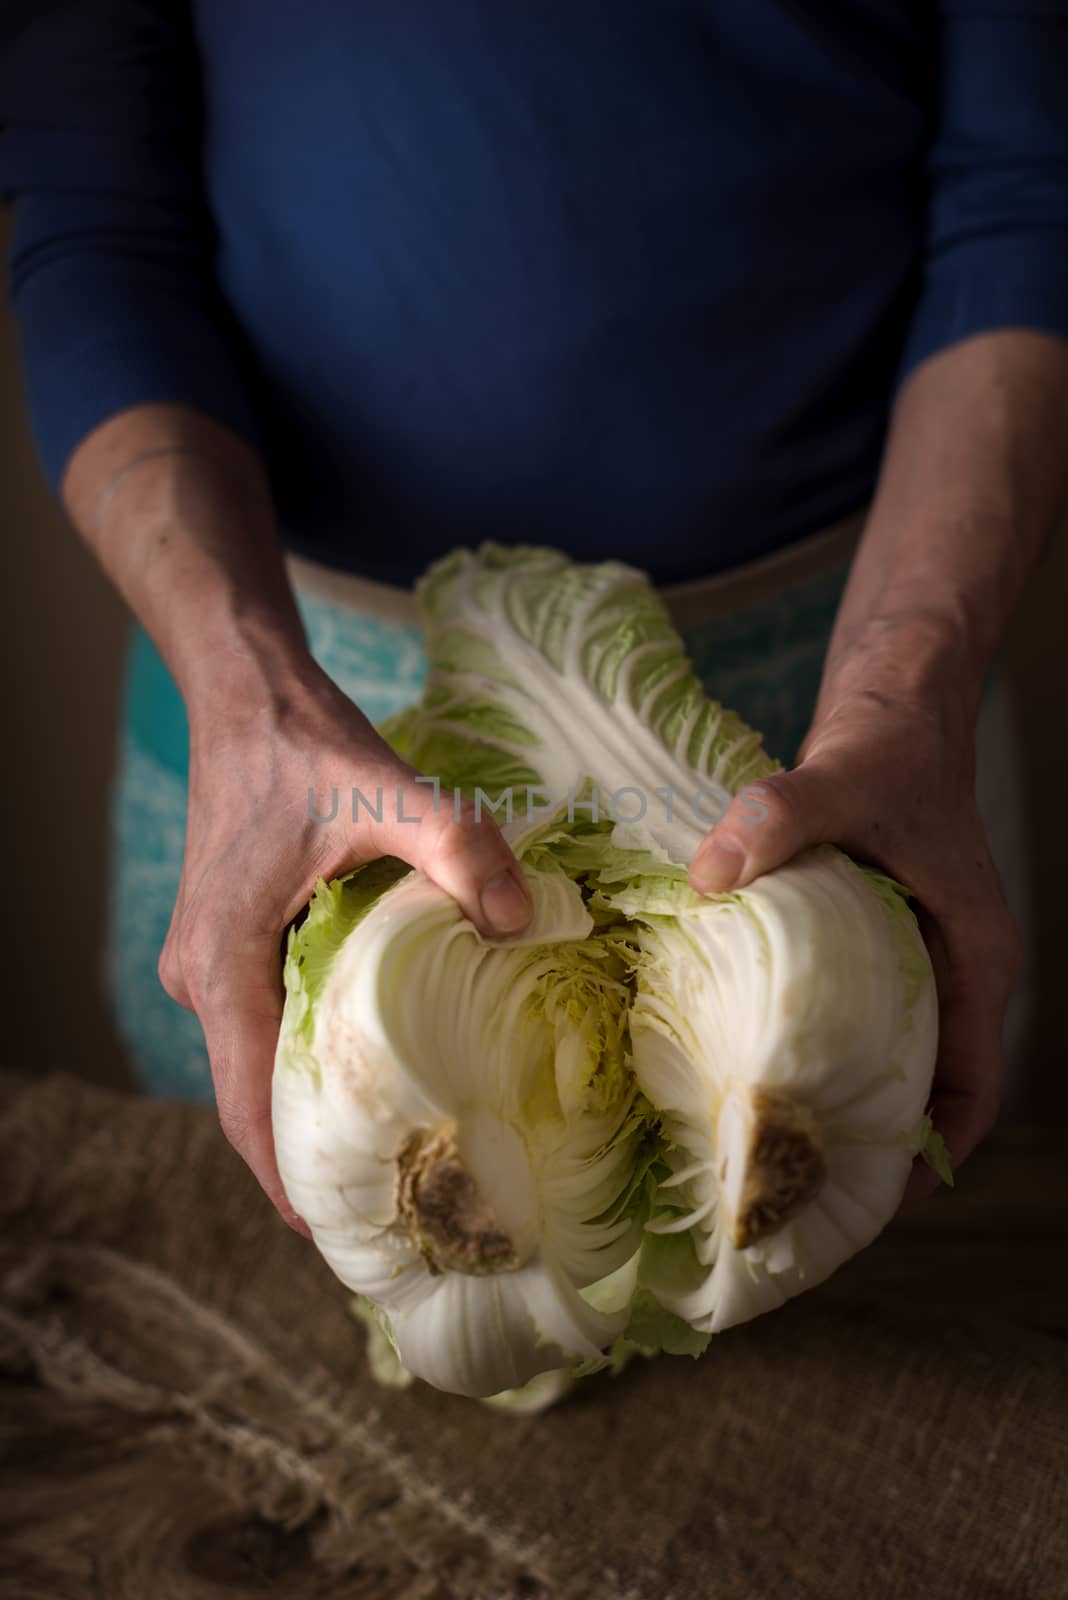 Woman shares the Chinese cabbage into two halves on the table by Deniskarpenkov